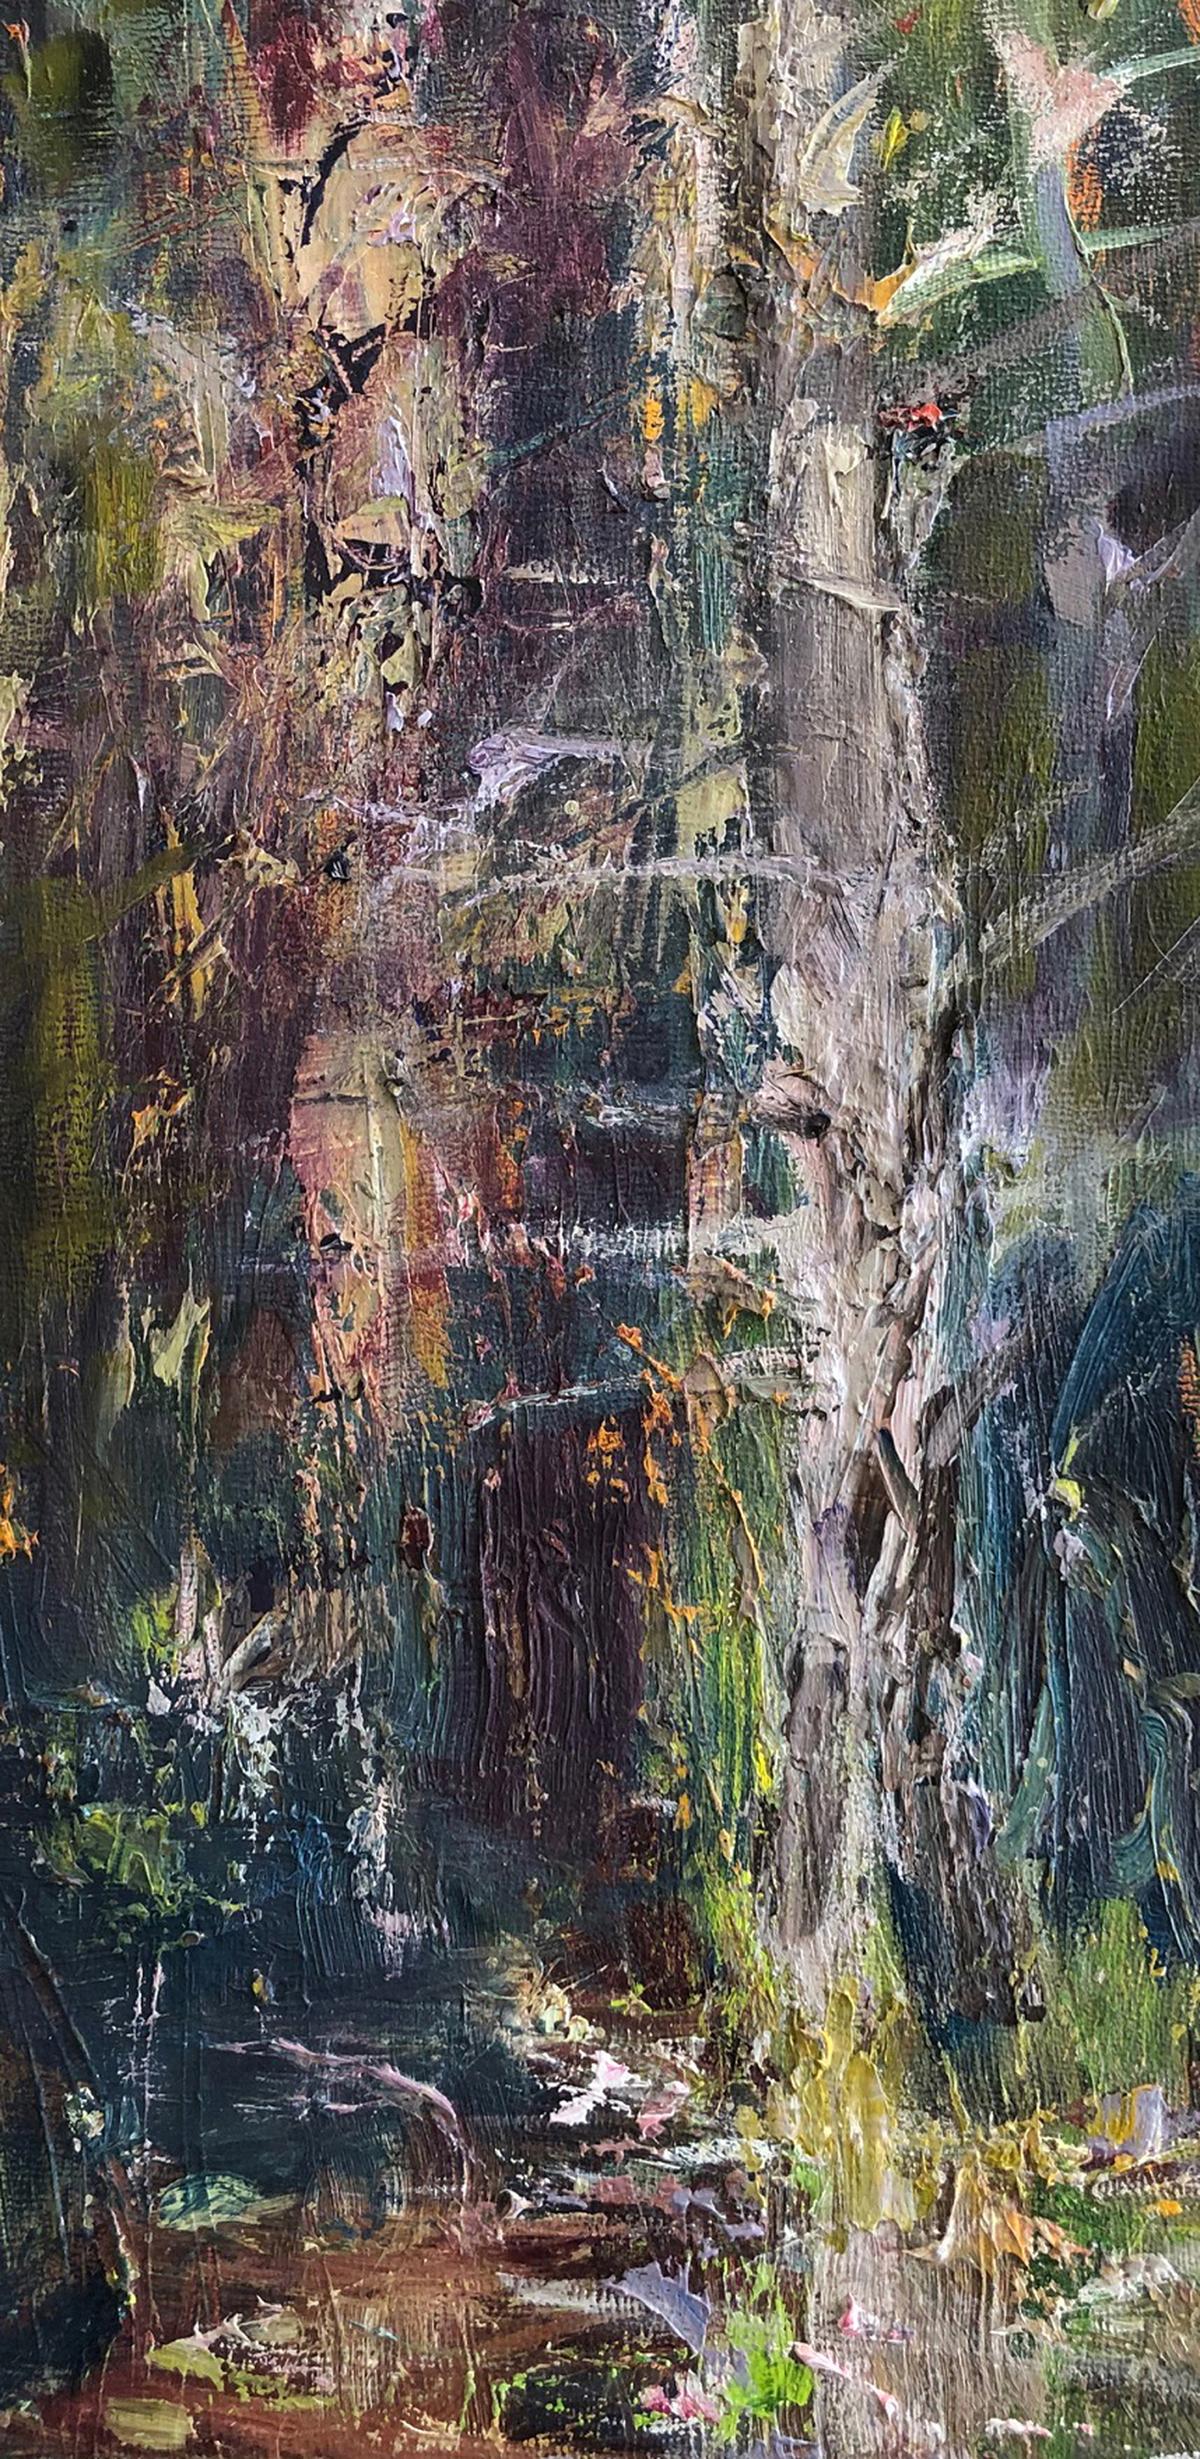 "Essence of the Forest", abstract, grays, browns, purples, greens, oil painting - Painting by Catherine Picard-Gibbs